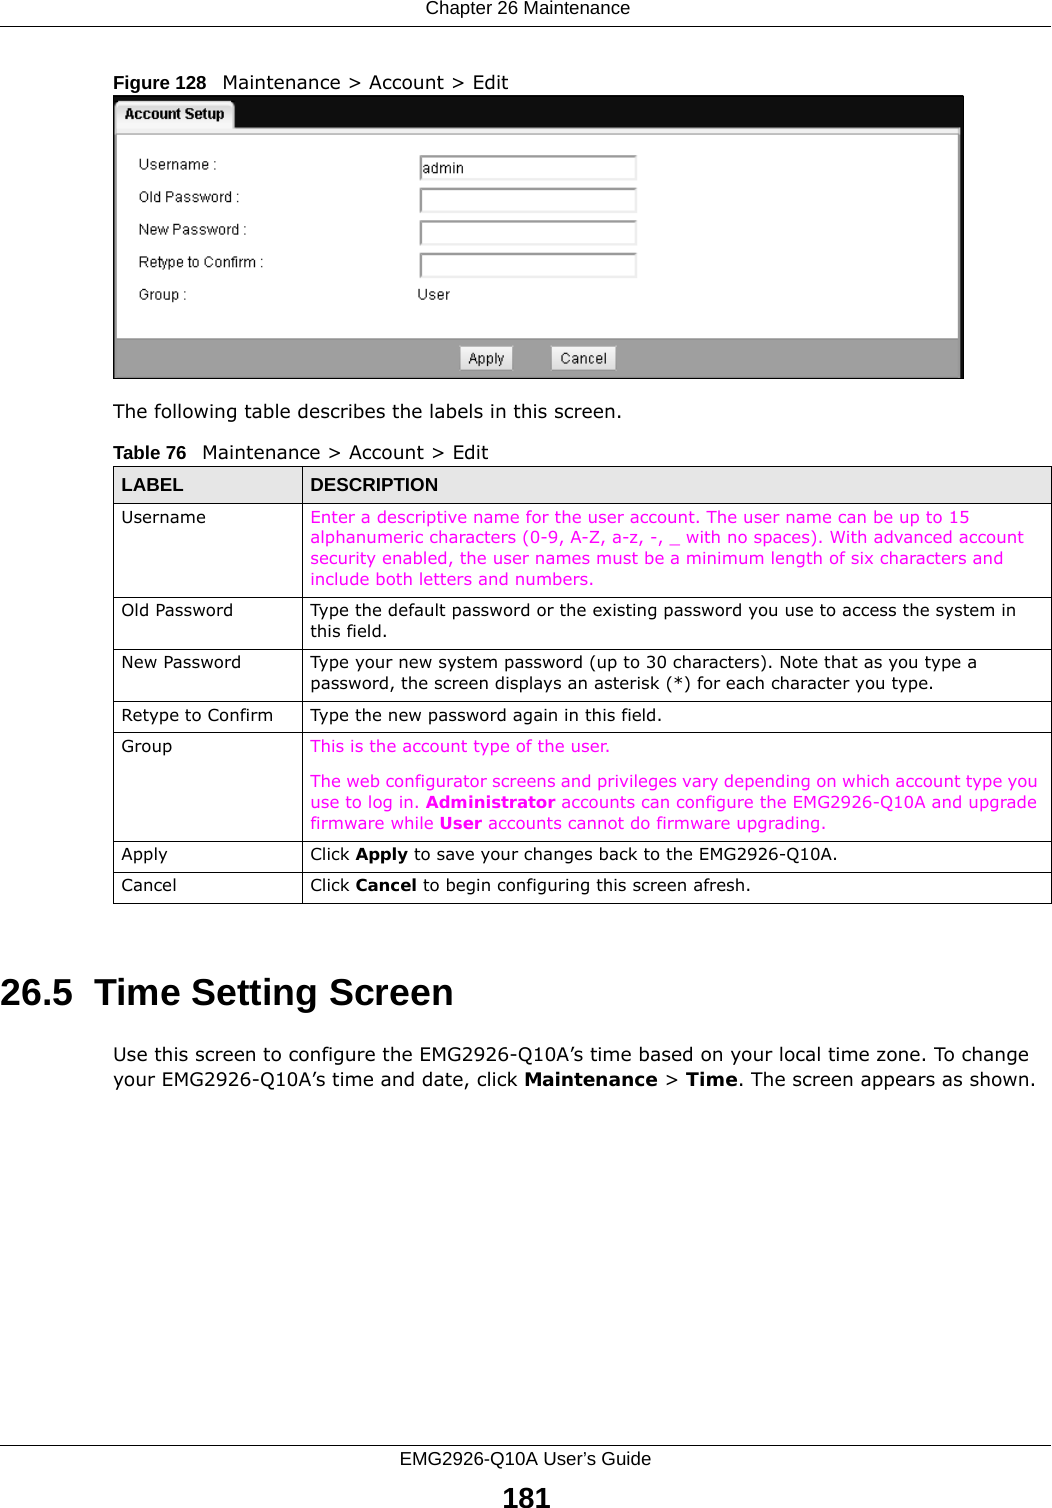  Chapter 26 MaintenanceEMG2926-Q10A User’s Guide181Figure 128   Maintenance &gt; Account &gt; Edit The following table describes the labels in this screen.26.5  Time Setting ScreenUse this screen to configure the EMG2926-Q10A’s time based on your local time zone. To change your EMG2926-Q10A’s time and date, click Maintenance &gt; Time. The screen appears as shown. Table 76   Maintenance &gt; Account &gt; EditLABEL DESCRIPTIONUsername Enter a descriptive name for the user account. The user name can be up to 15 alphanumeric characters (0-9, A-Z, a-z, -, _ with no spaces). With advanced account security enabled, the user names must be a minimum length of six characters and include both letters and numbers. Old Password Type the default password or the existing password you use to access the system in this field.New Password Type your new system password (up to 30 characters). Note that as you type a password, the screen displays an asterisk (*) for each character you type.Retype to Confirm Type the new password again in this field.Group This is the account type of the user. The web configurator screens and privileges vary depending on which account type you use to log in. Administrator accounts can configure the EMG2926-Q10A and upgrade firmware while User accounts cannot do firmware upgrading. Apply Click Apply to save your changes back to the EMG2926-Q10A.Cancel Click Cancel to begin configuring this screen afresh.